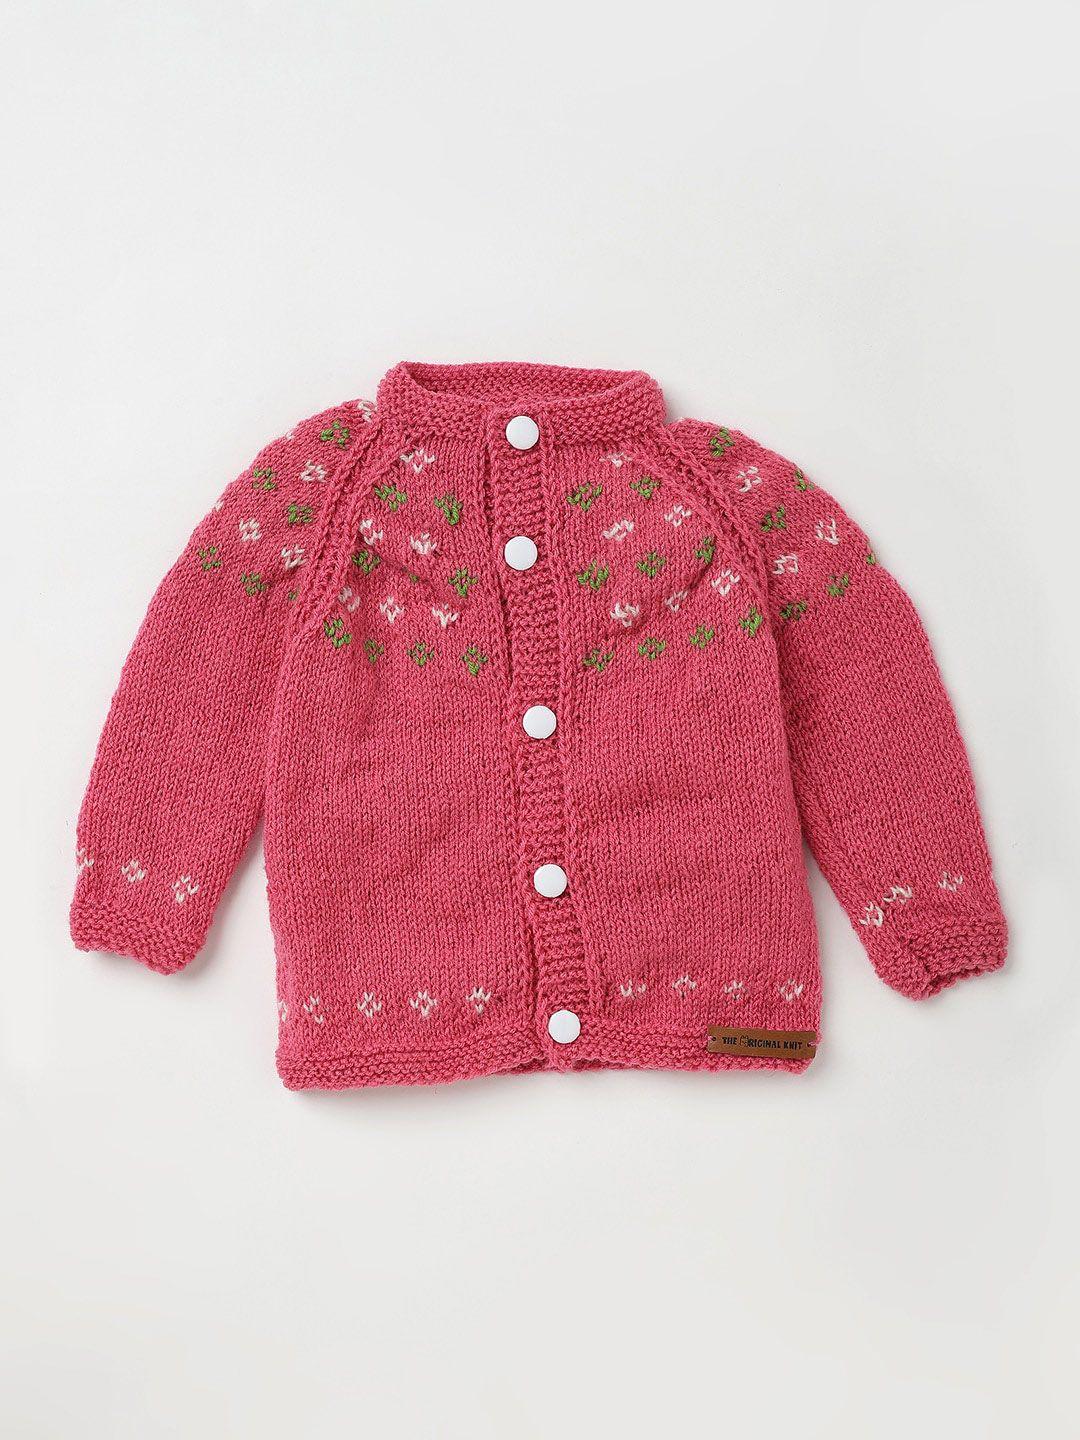 the original knit unisex kids pink & green cable knit cardigan